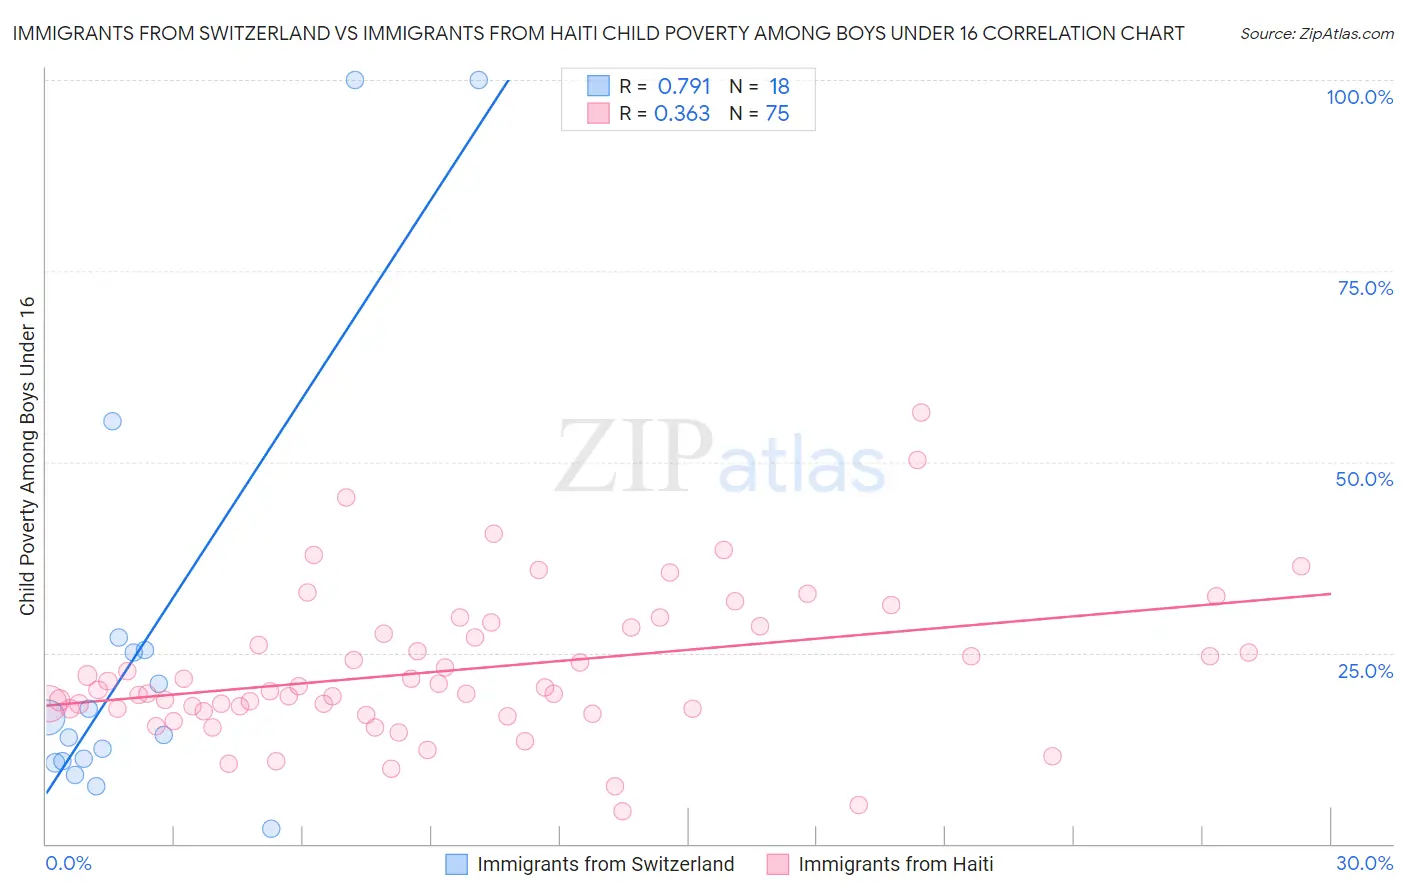 Immigrants from Switzerland vs Immigrants from Haiti Child Poverty Among Boys Under 16